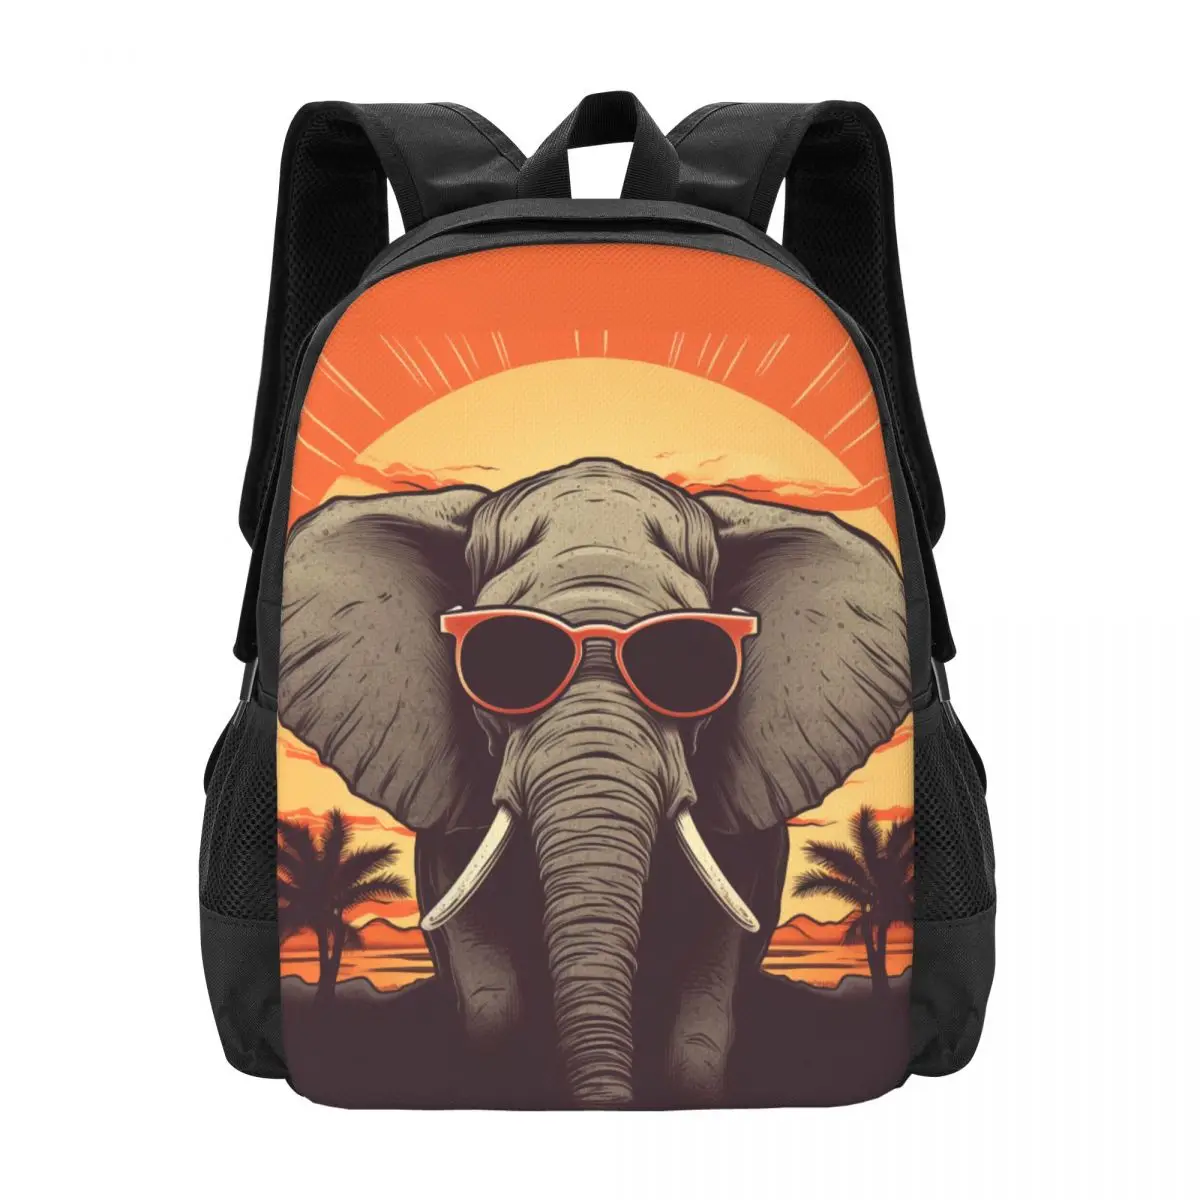 

Elephant Backpack Retro Sunset Animals With Sunglasses Teen Polyester Outdoor Backpacks Pattern Novelty School Bags Rucksack